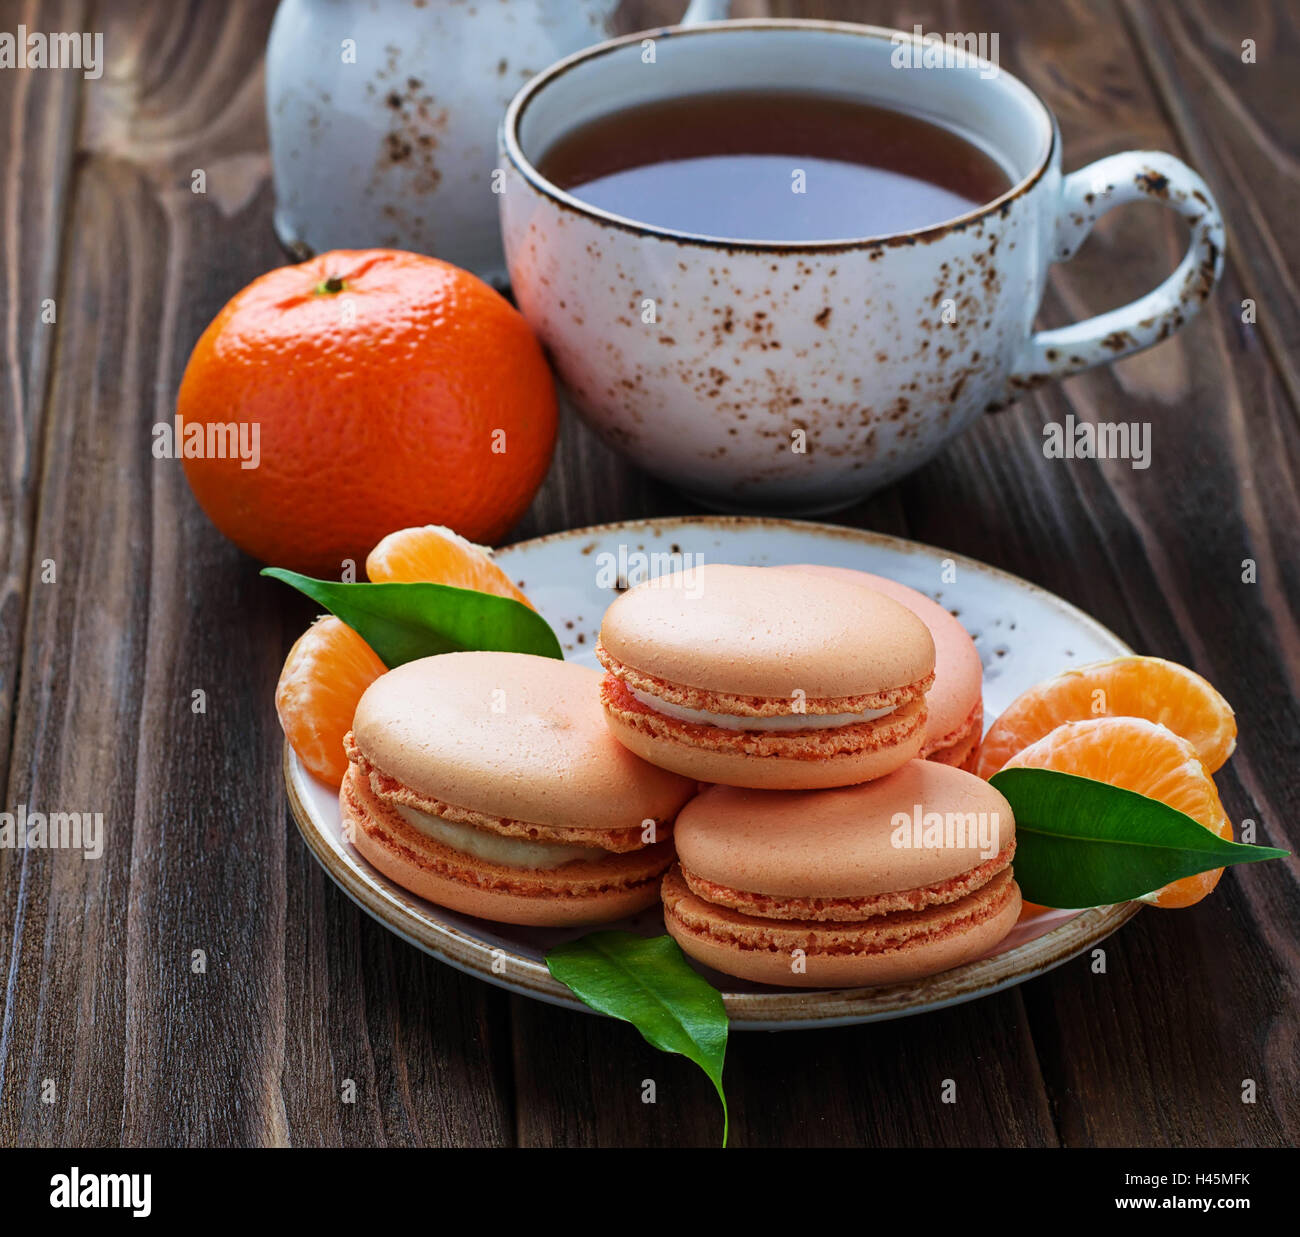 French macaroons with tangerine. Selective focus Stock Photo